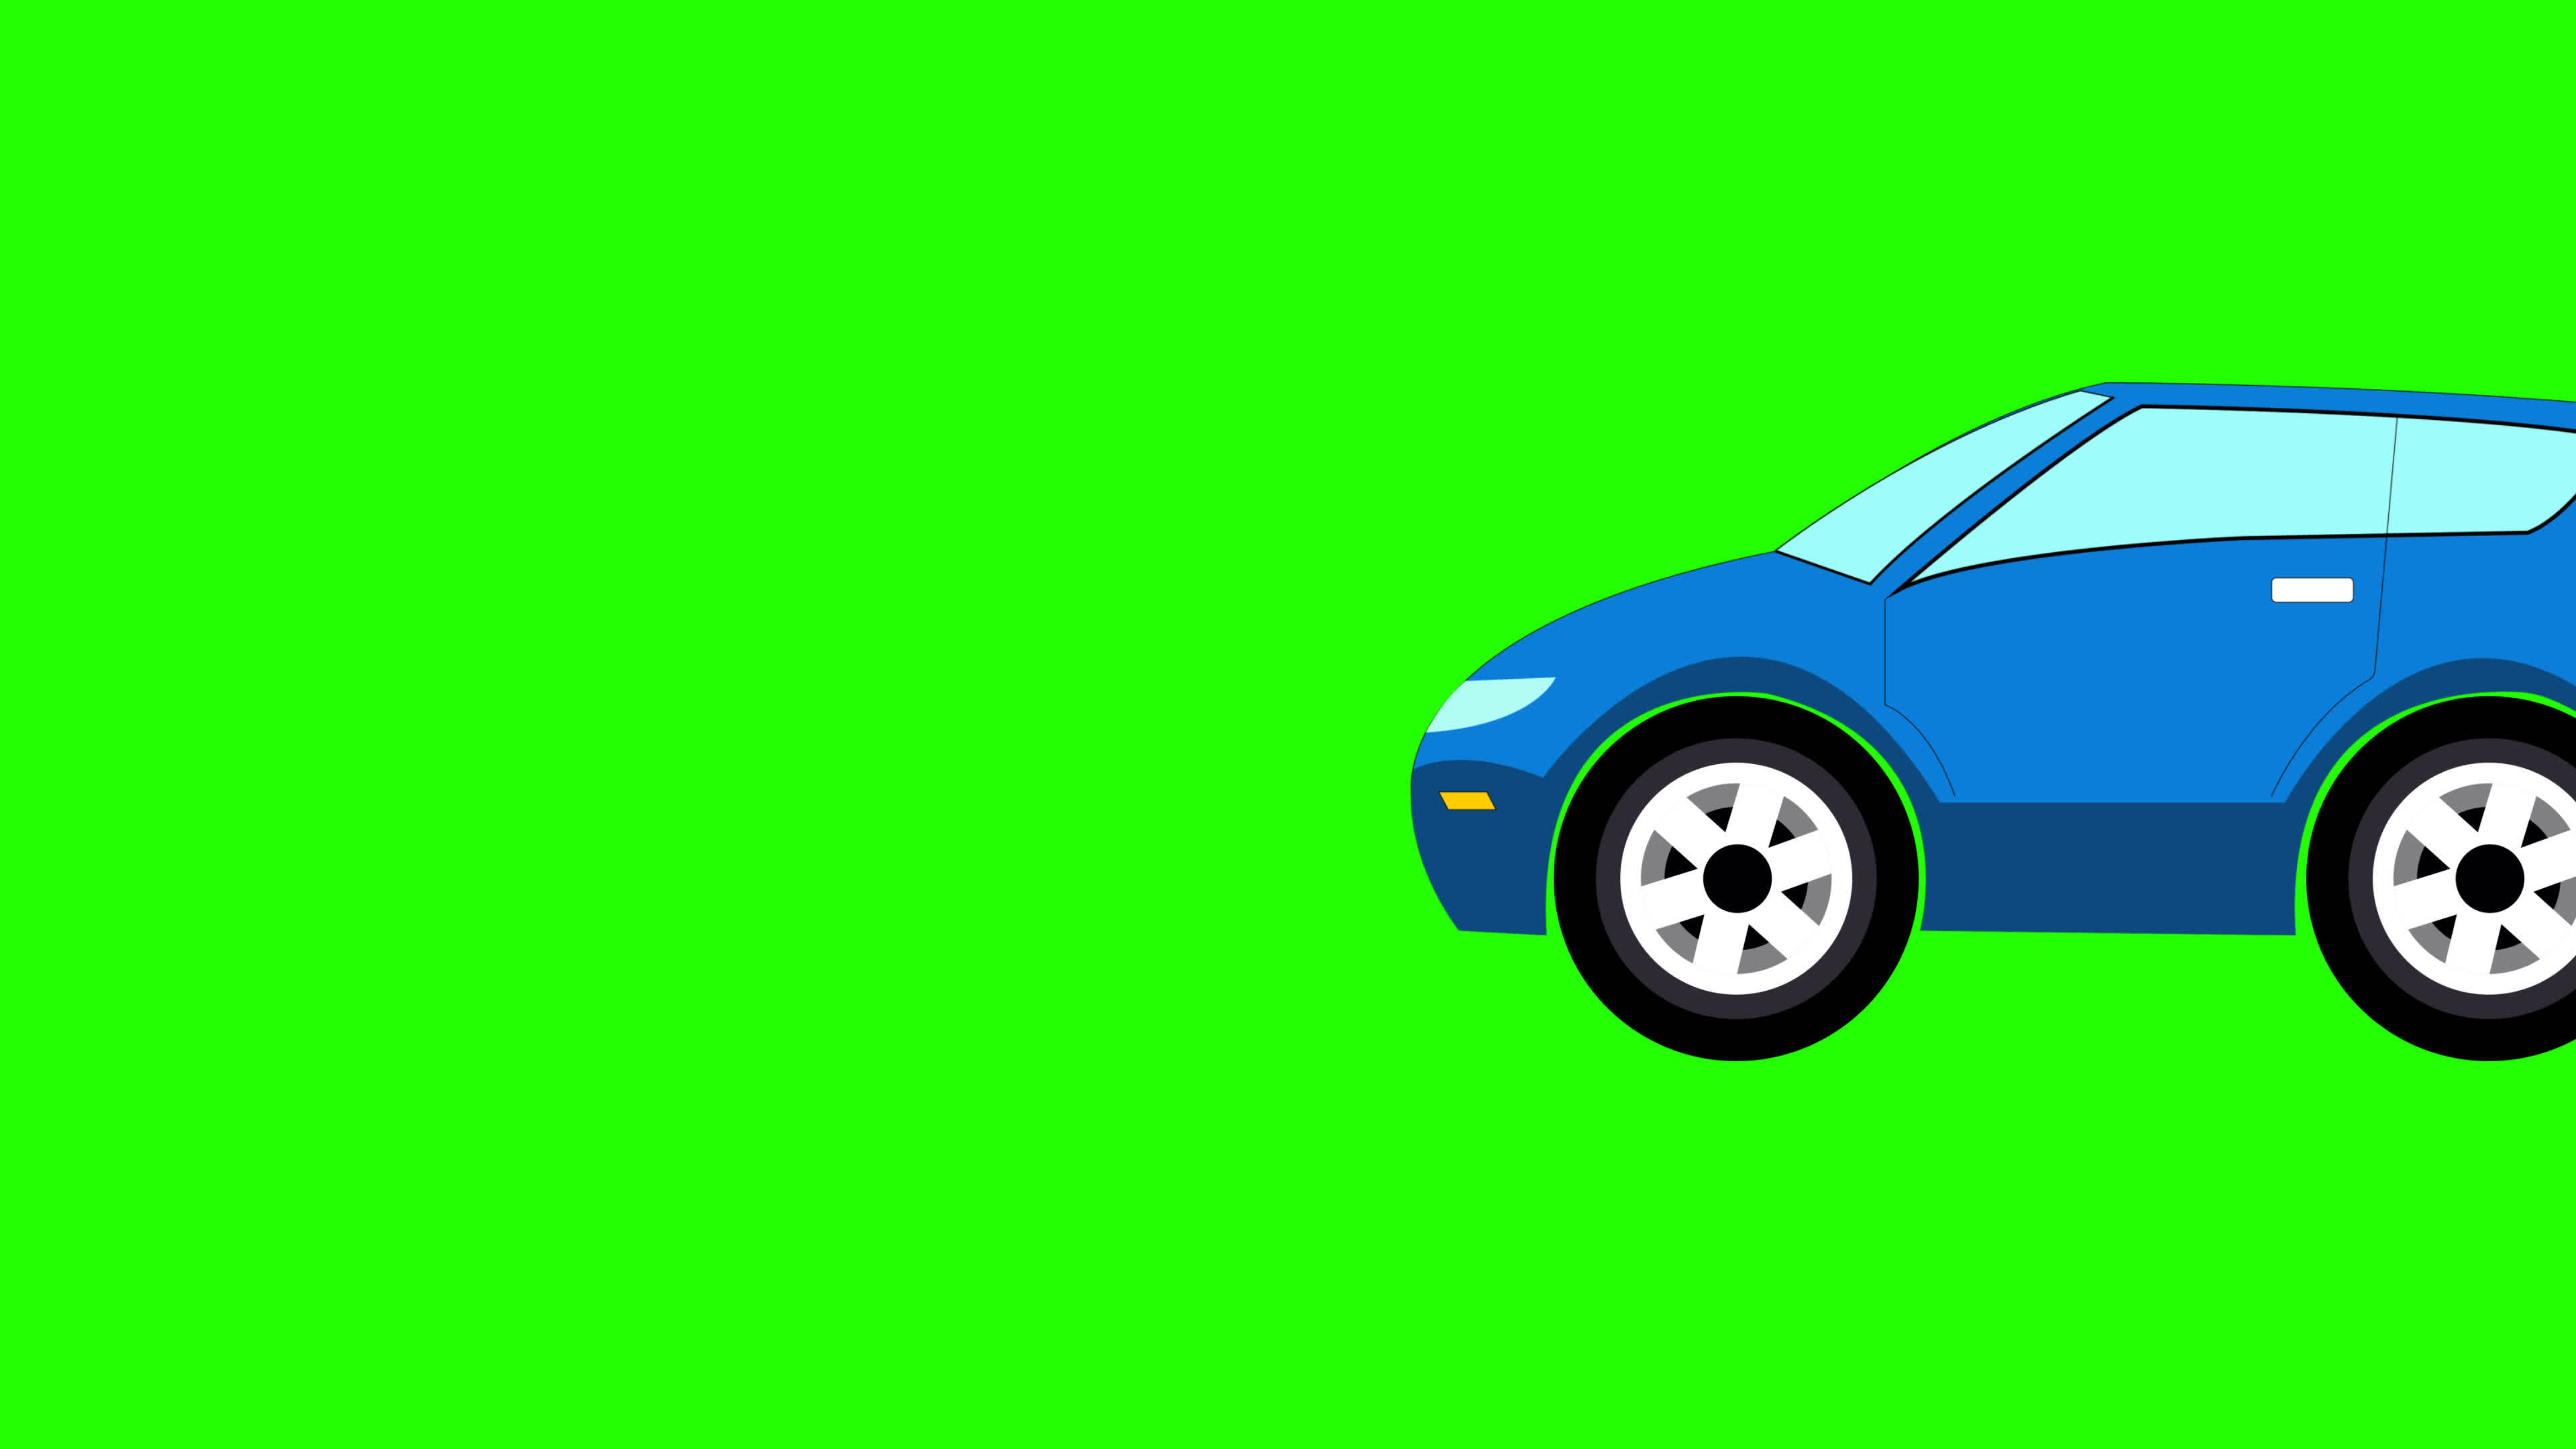 Cars Green Screen Stock Video Footage for Free Download